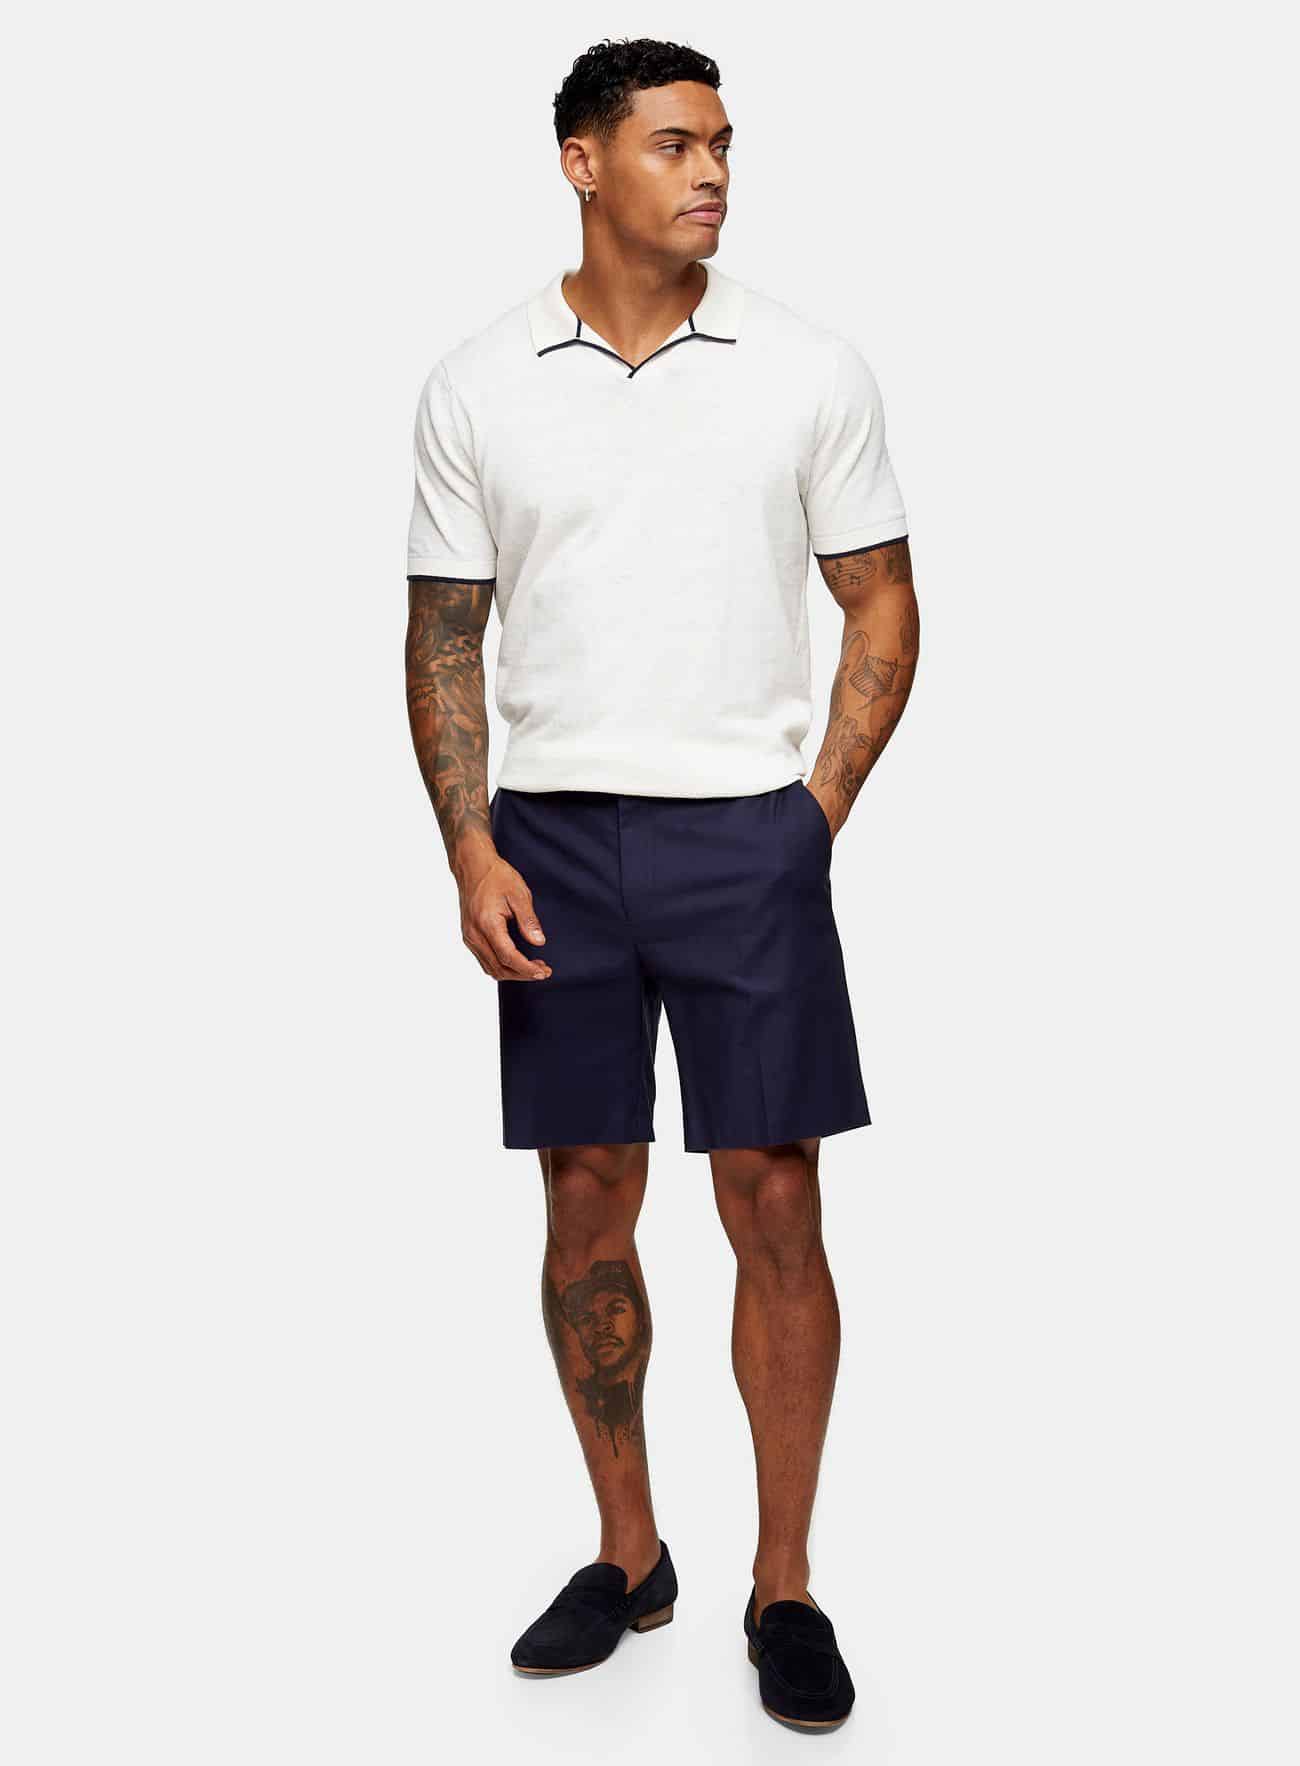 Story on men's fashion for the home office, shorts